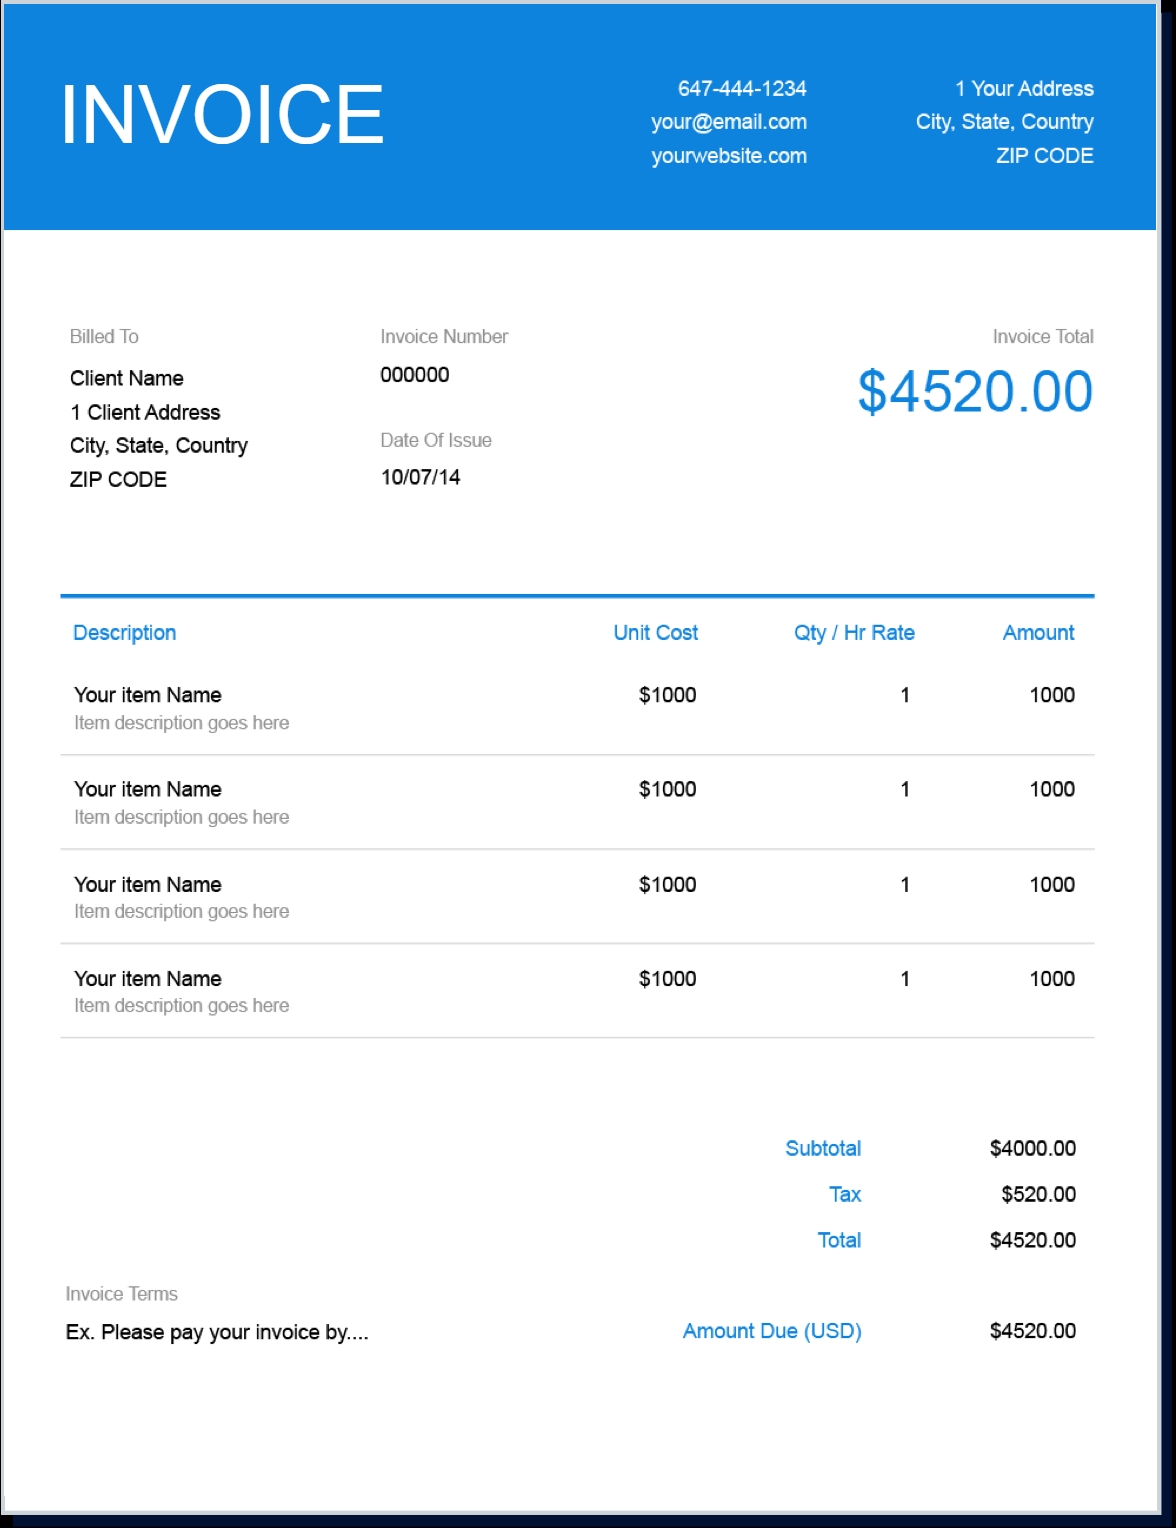 invoice template create and send free invoices instantly word invoice template for download